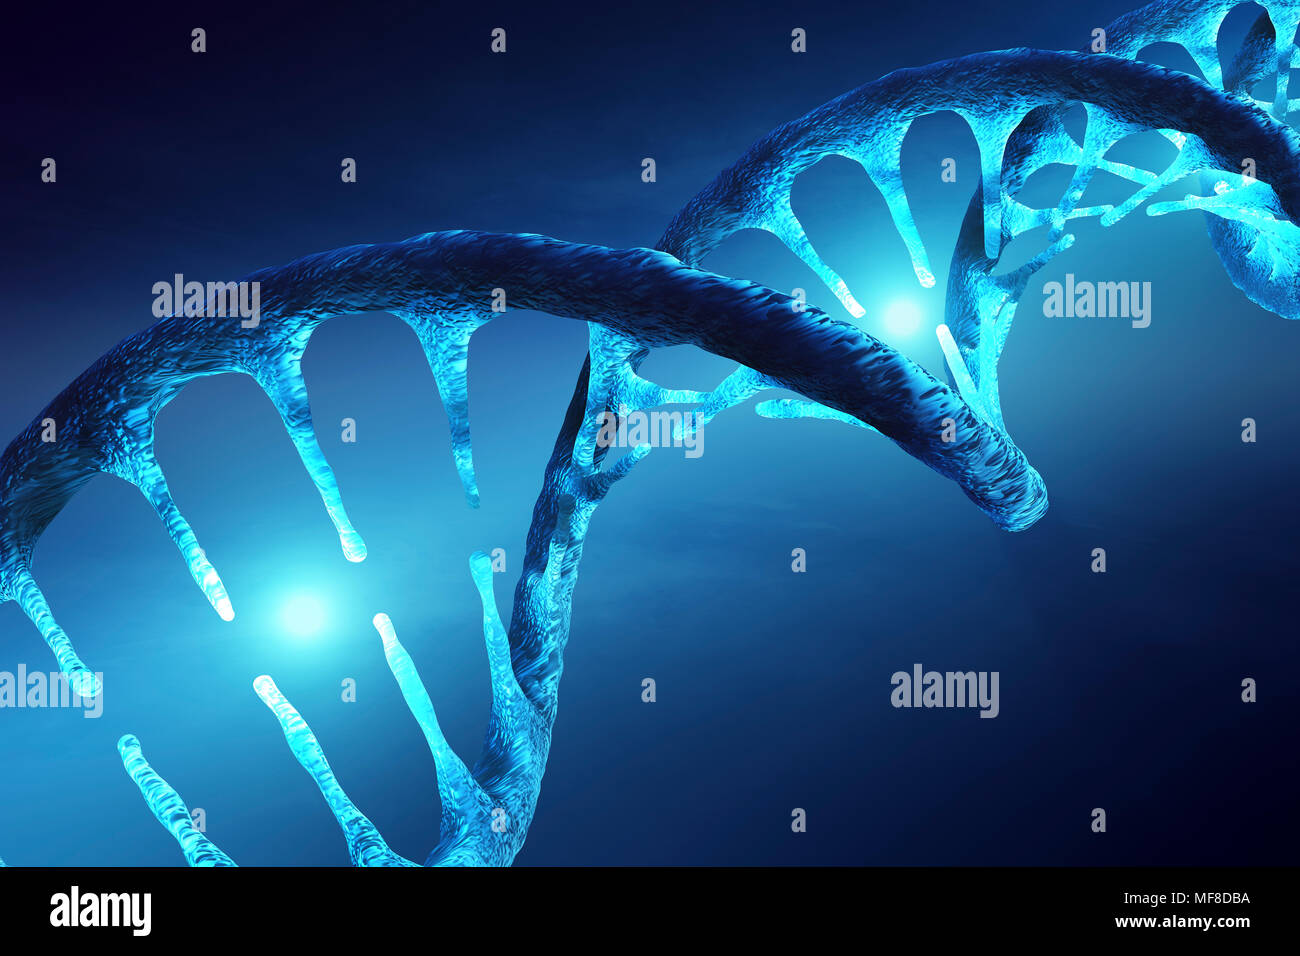 Conceptual image of DNA structure with illuminated molecules illustrating genetic alteration, manipulation or modification. 3D rendering artwork Stock Photo